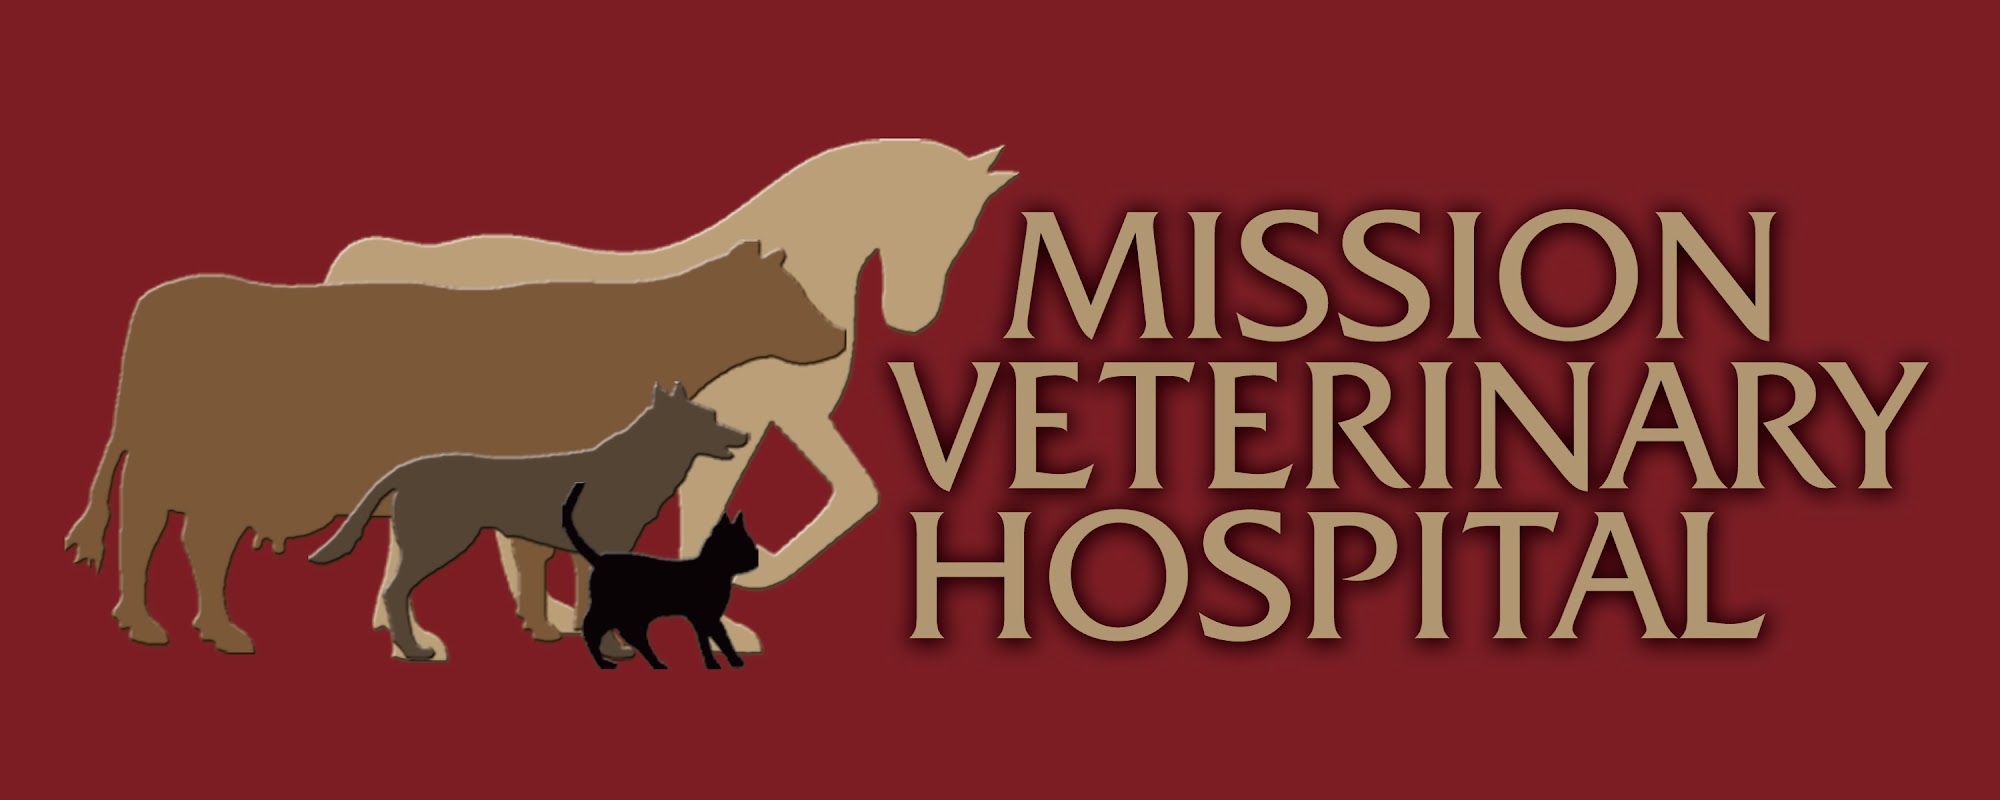 Mission Veterinary Hospital: C. Michele Fuentes, DVM